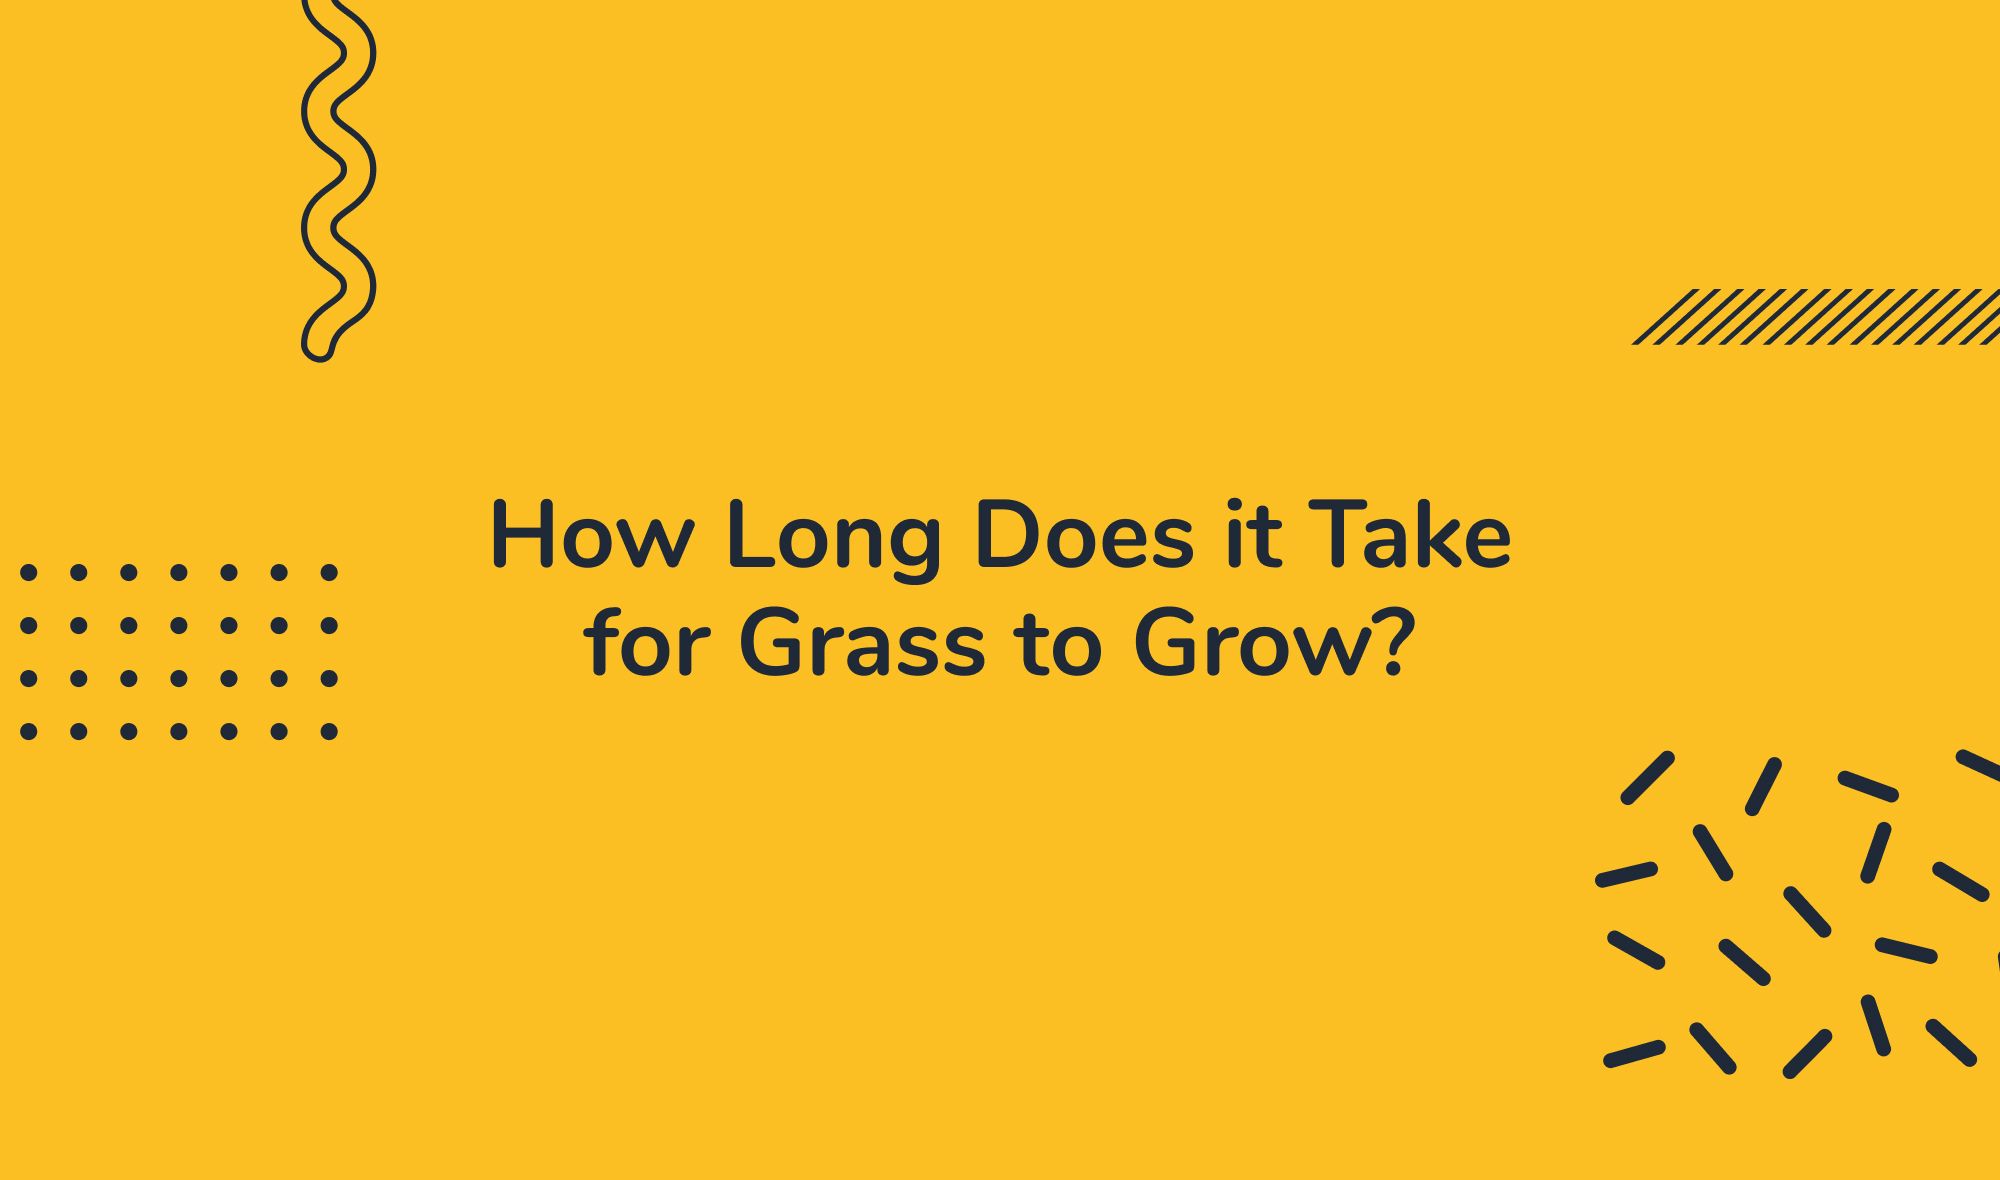 How Long Does it Take for Grass to Grow?